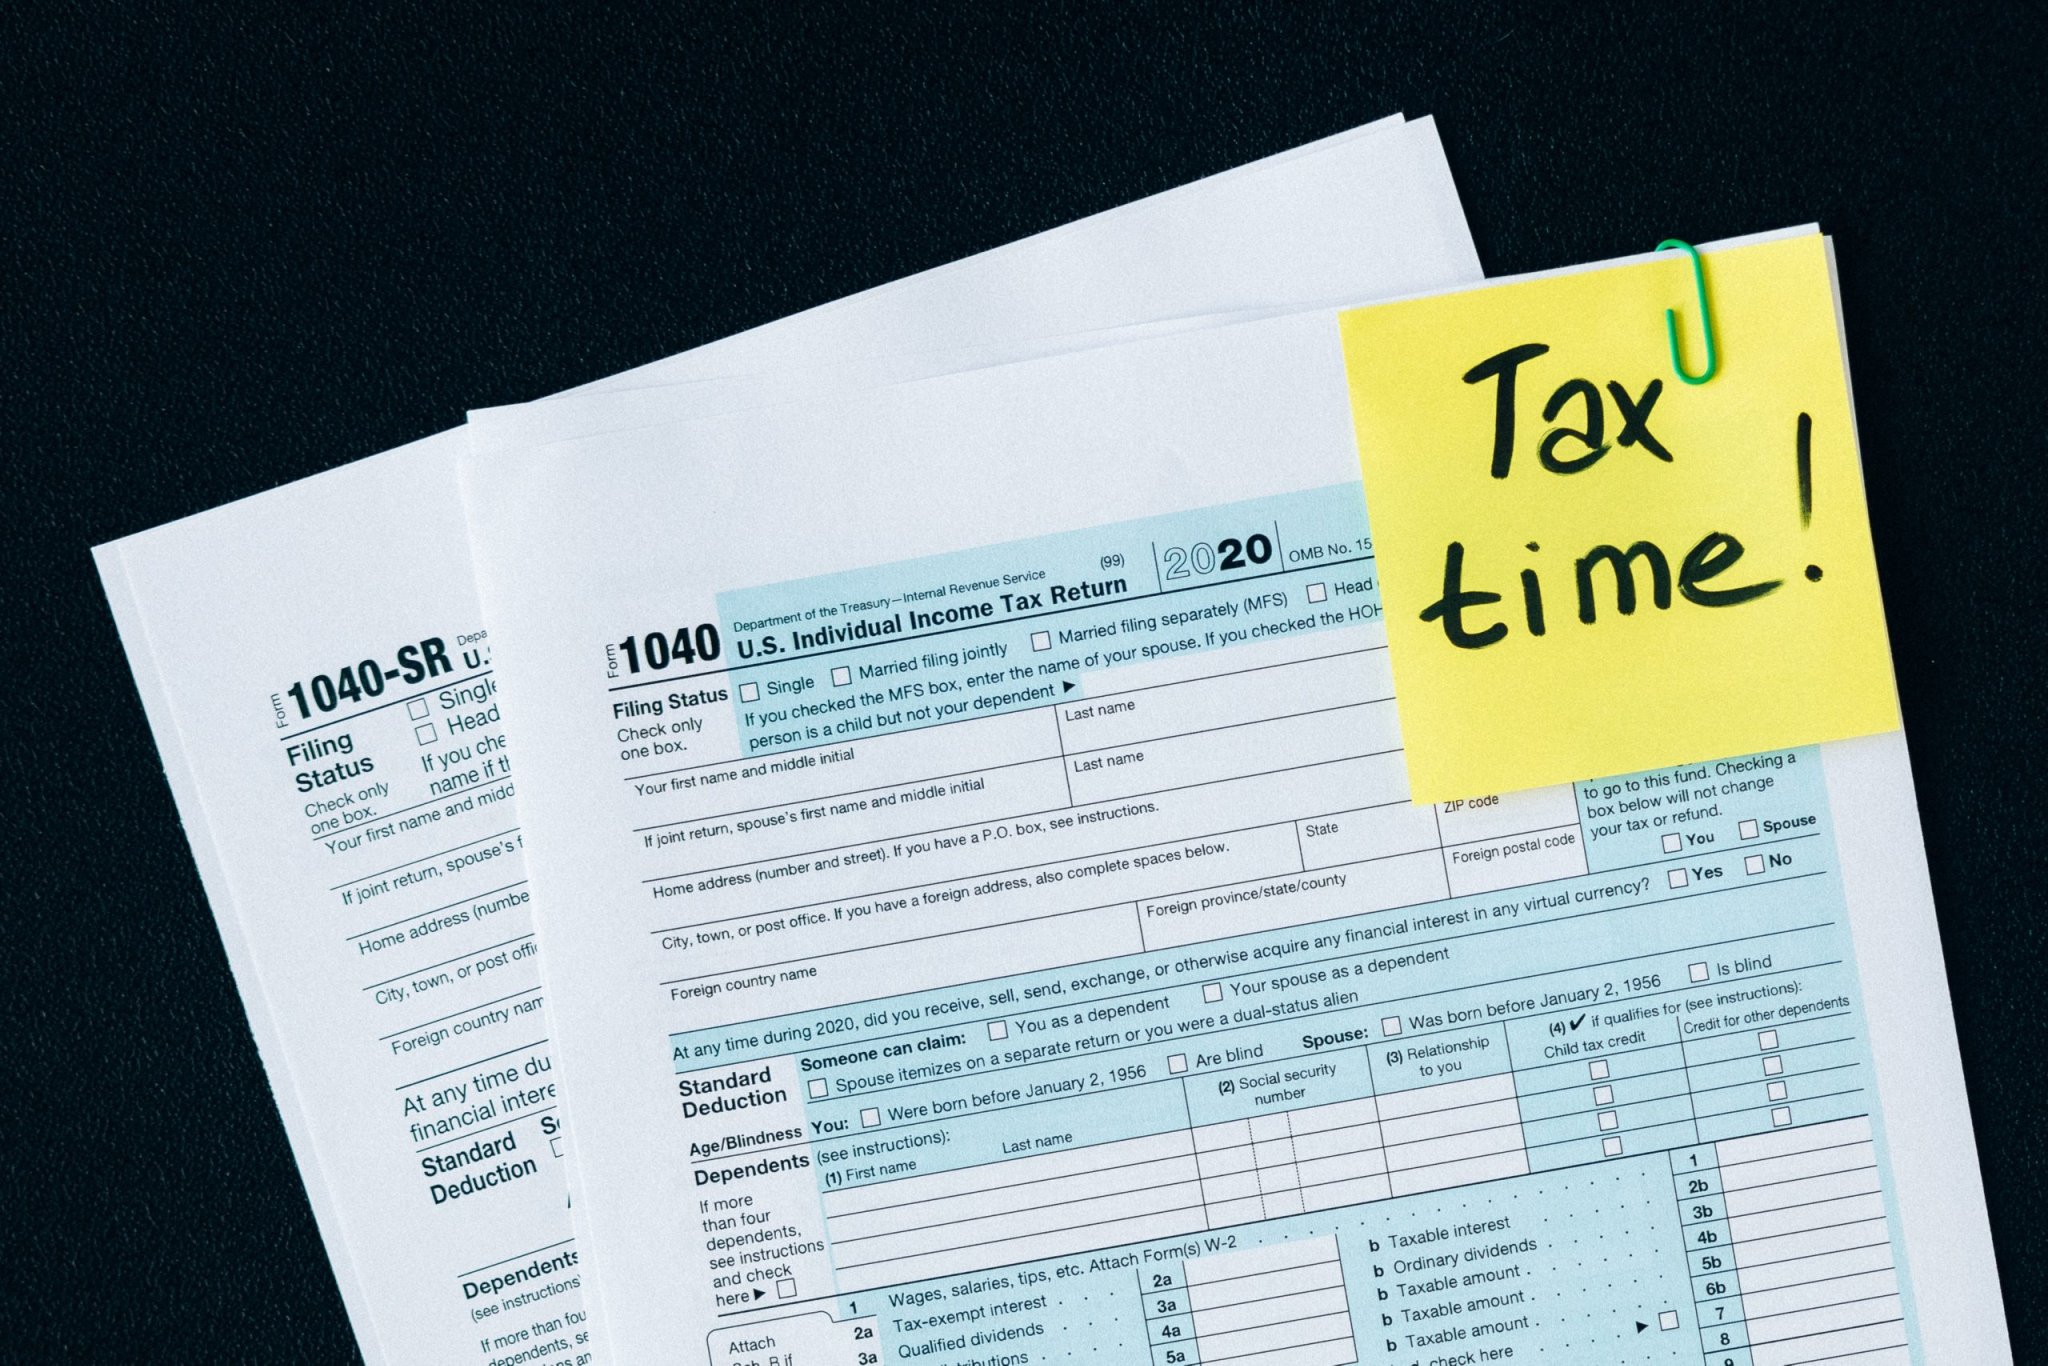 Will Your Tax Refund Be Delayed? IRS Holding 30M Tax Returns For Manual Processing